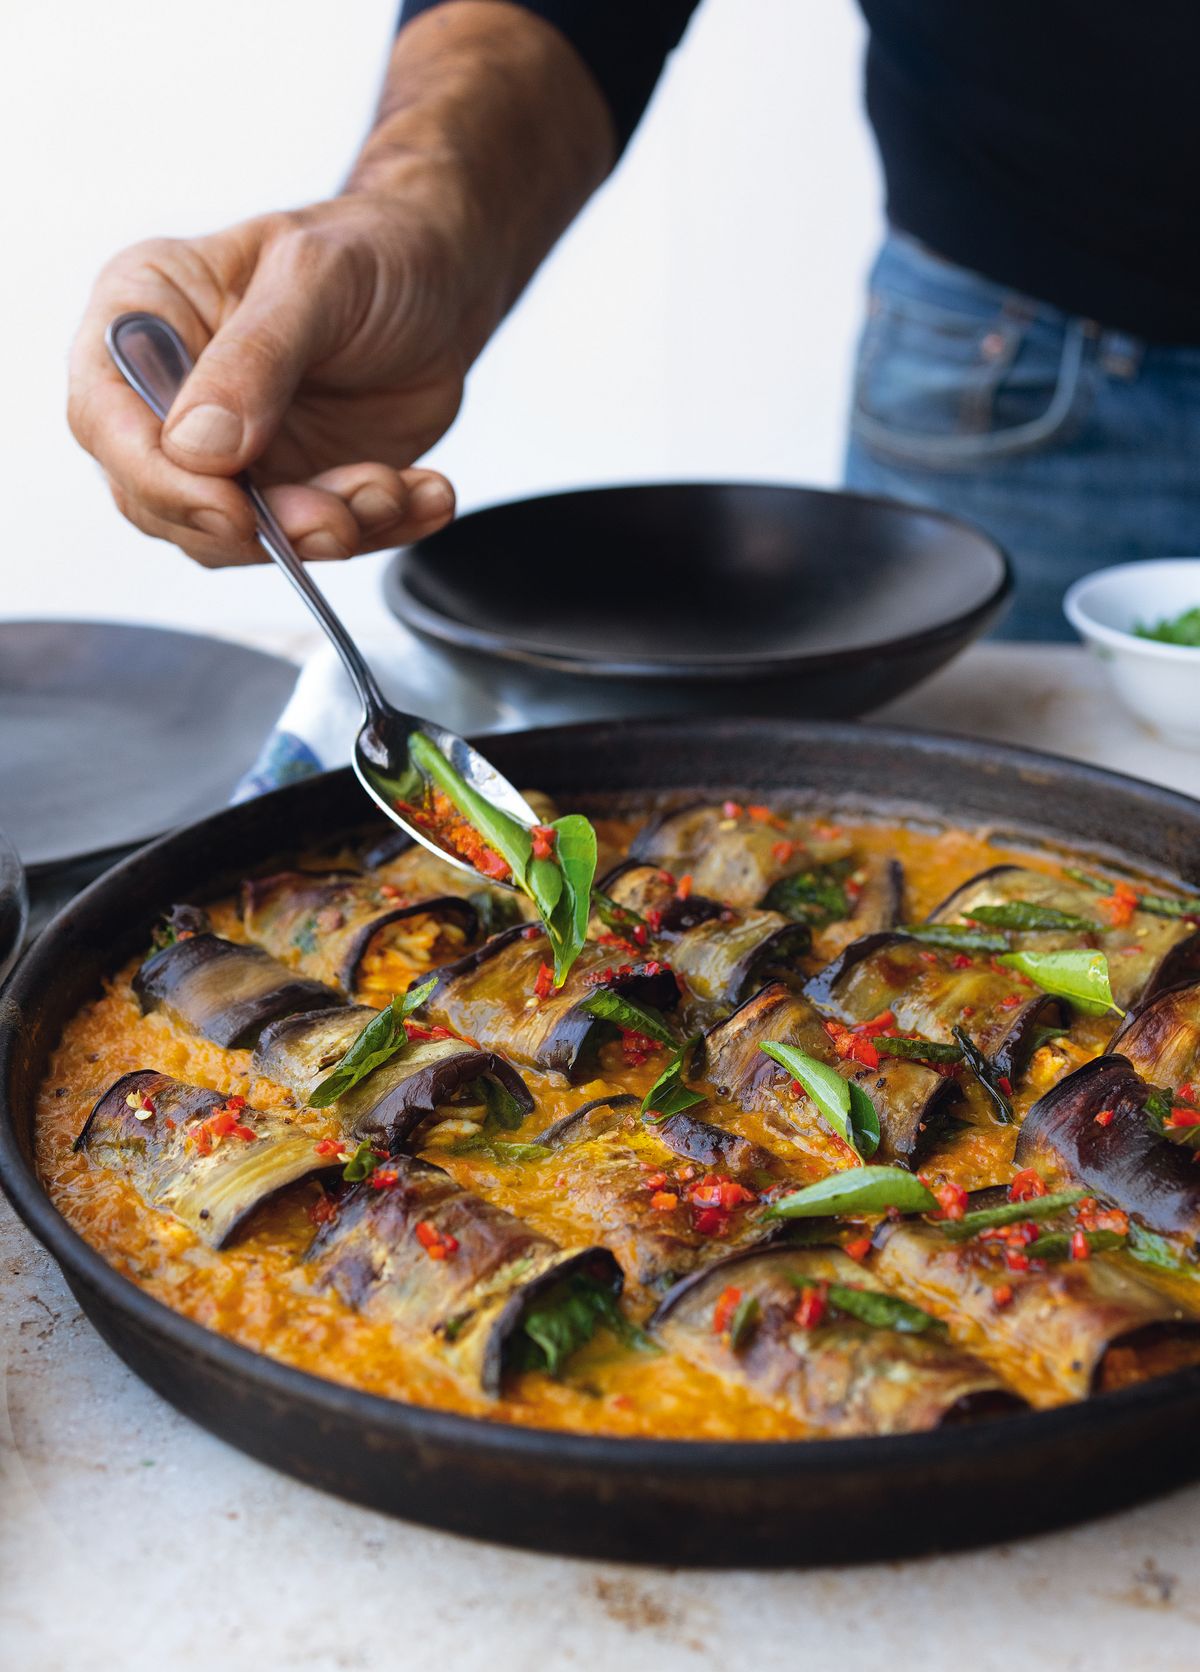 Yotam Ottolenghi’s Stuffed Aubergines in a Curry and Coconut Dal